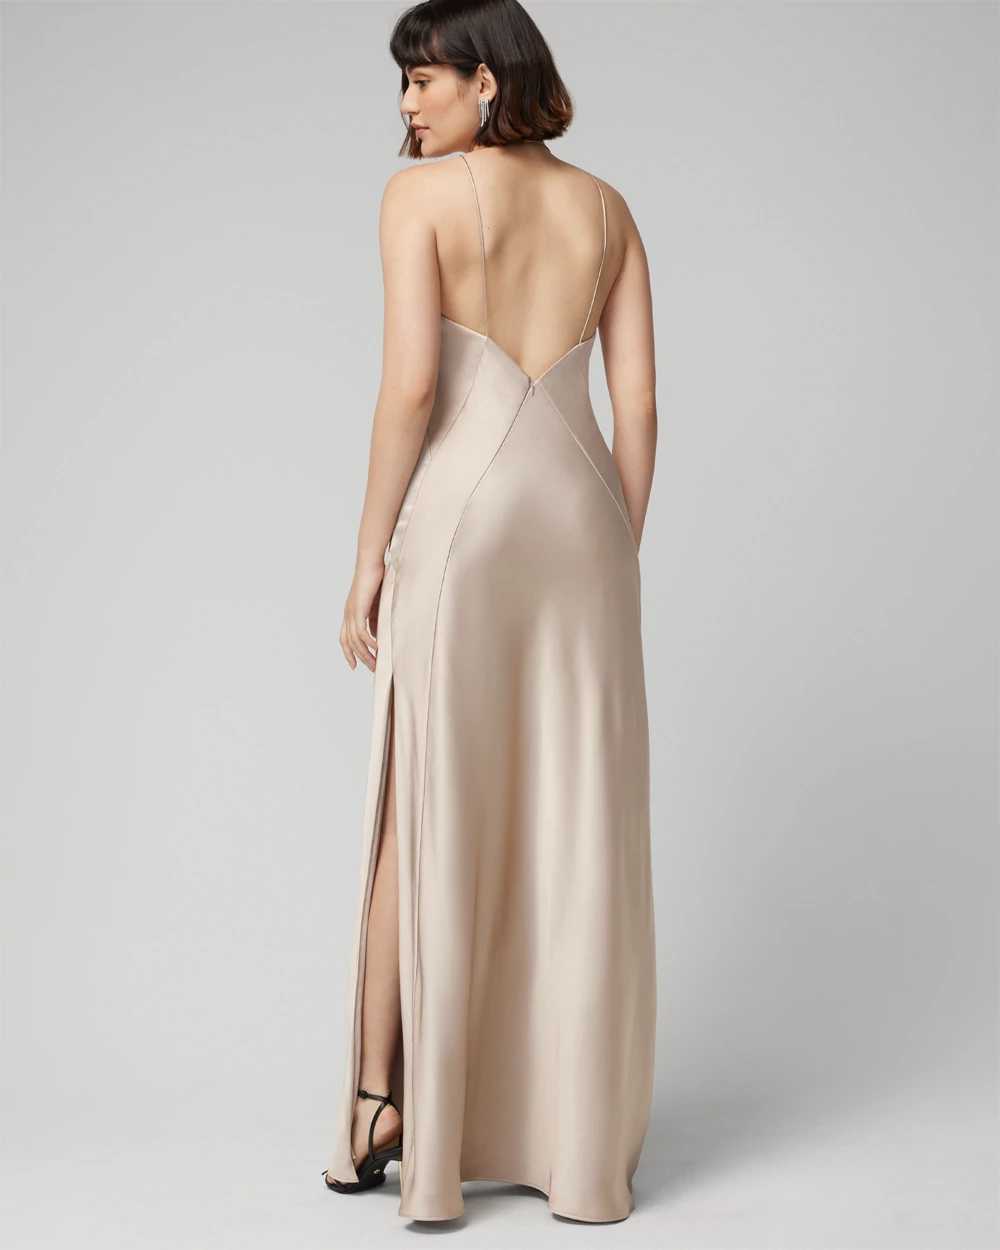 Petite V-Neck Low Back Satin Gown click to view larger image.